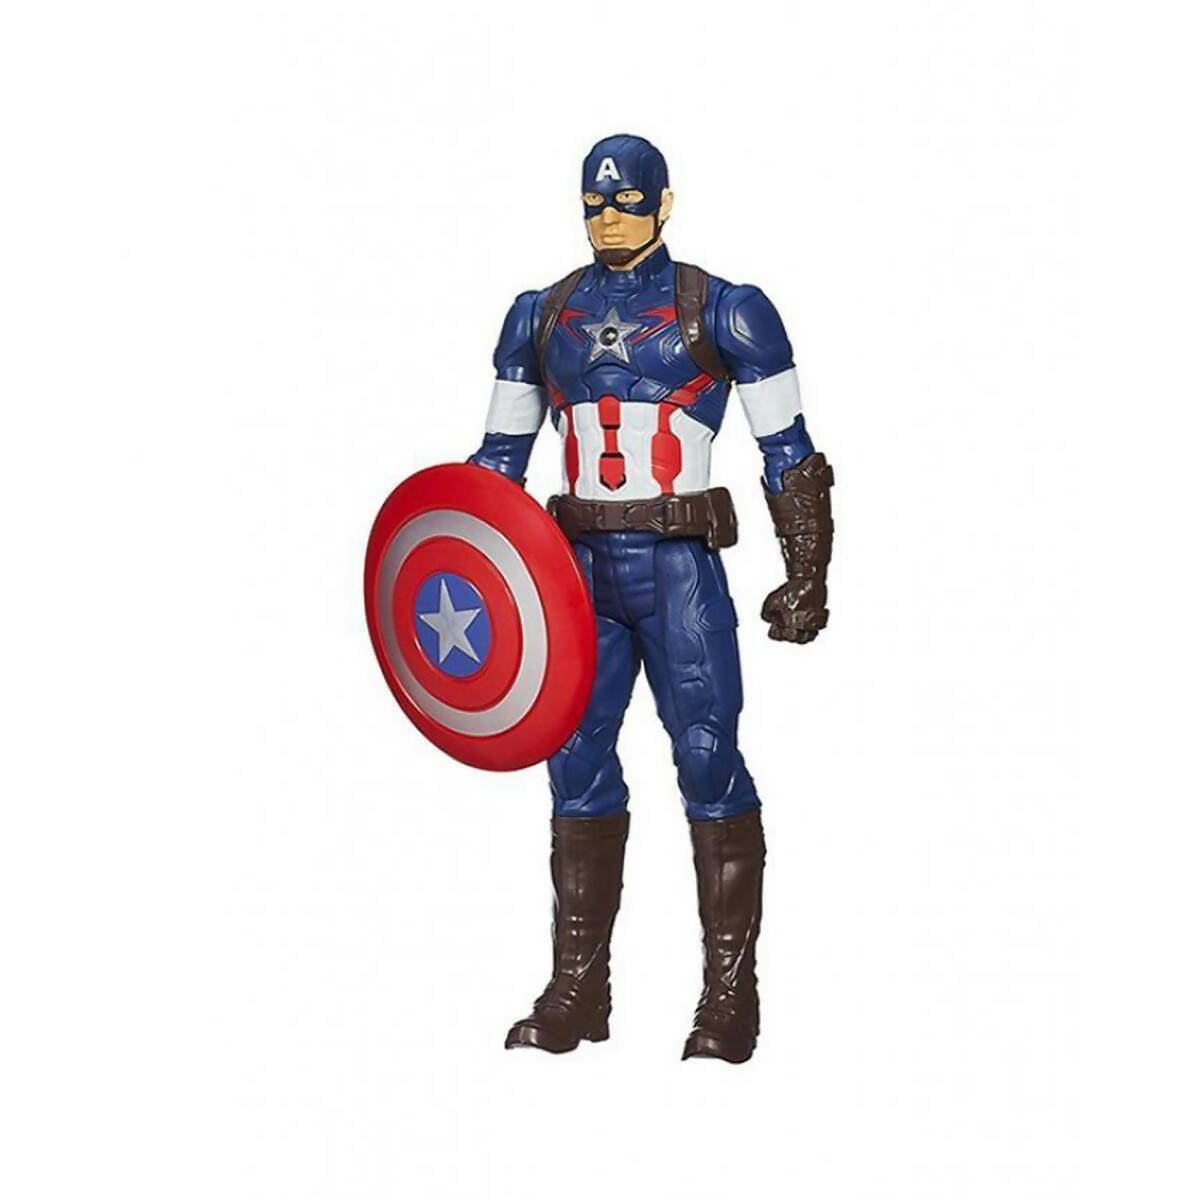 Planet X - Avengers: Captain America Heroic Figure - 8 Inches